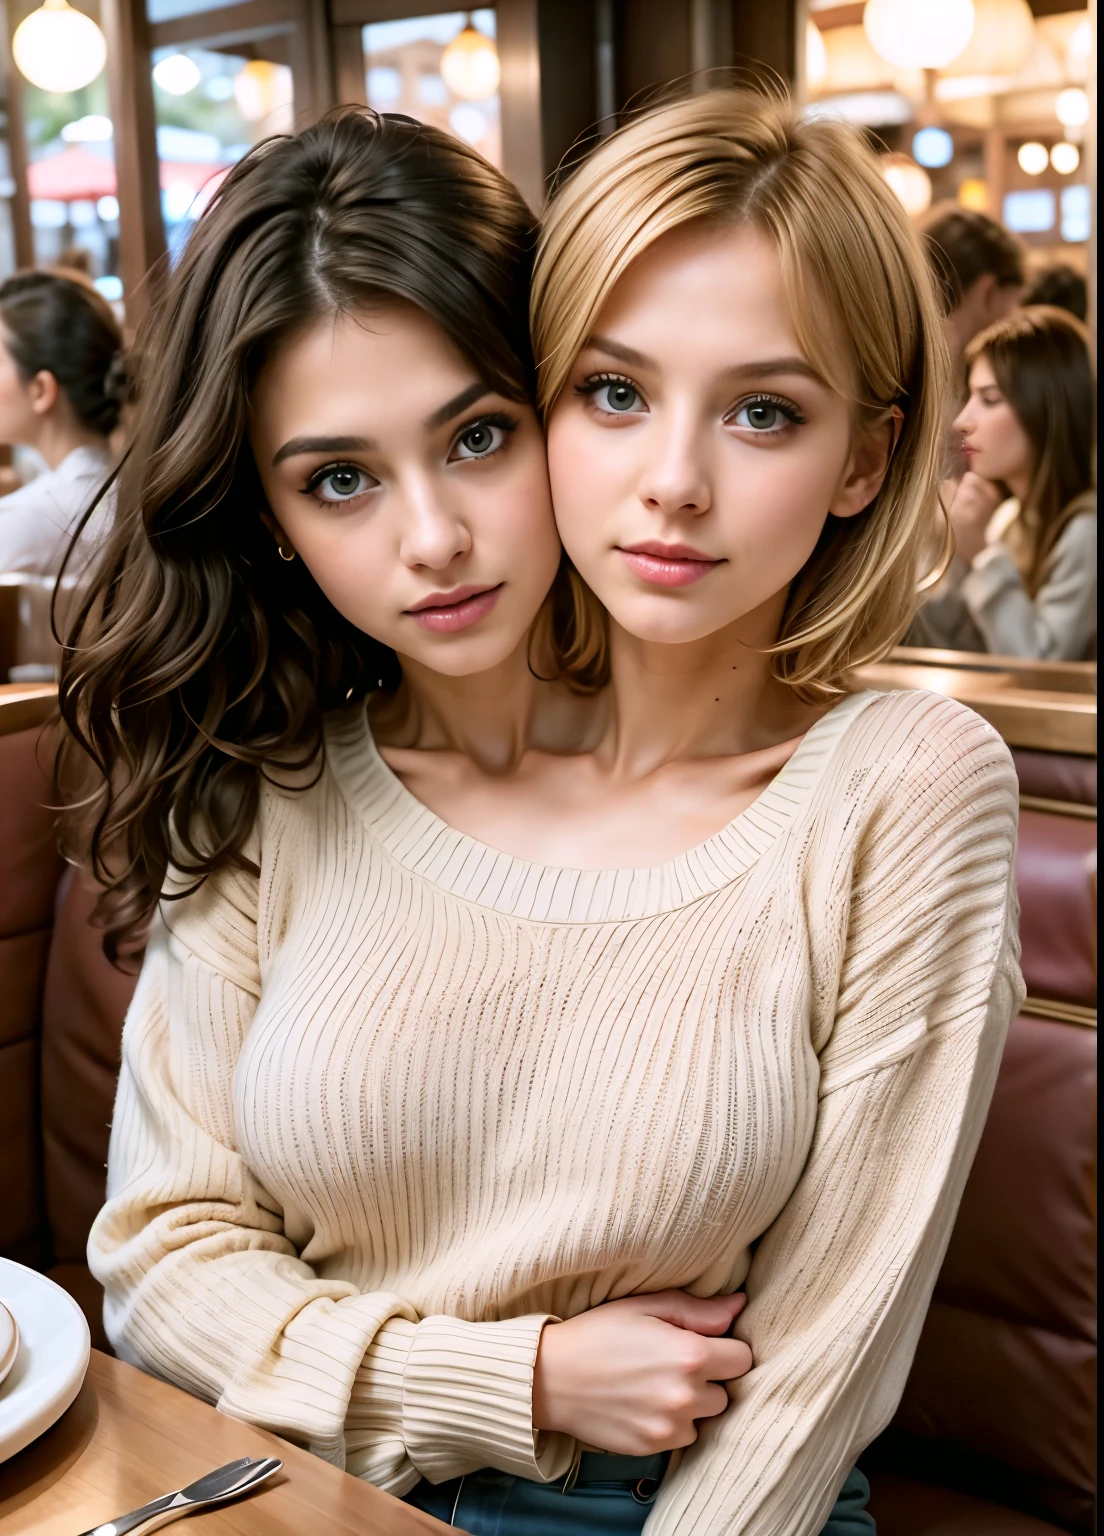 best resolution, 2 heads, white woman with two heads, conjoined, different heads, beautiful , blonde, short hair, long hair, eyeliner, 25 years old, at restaurant, sweater,